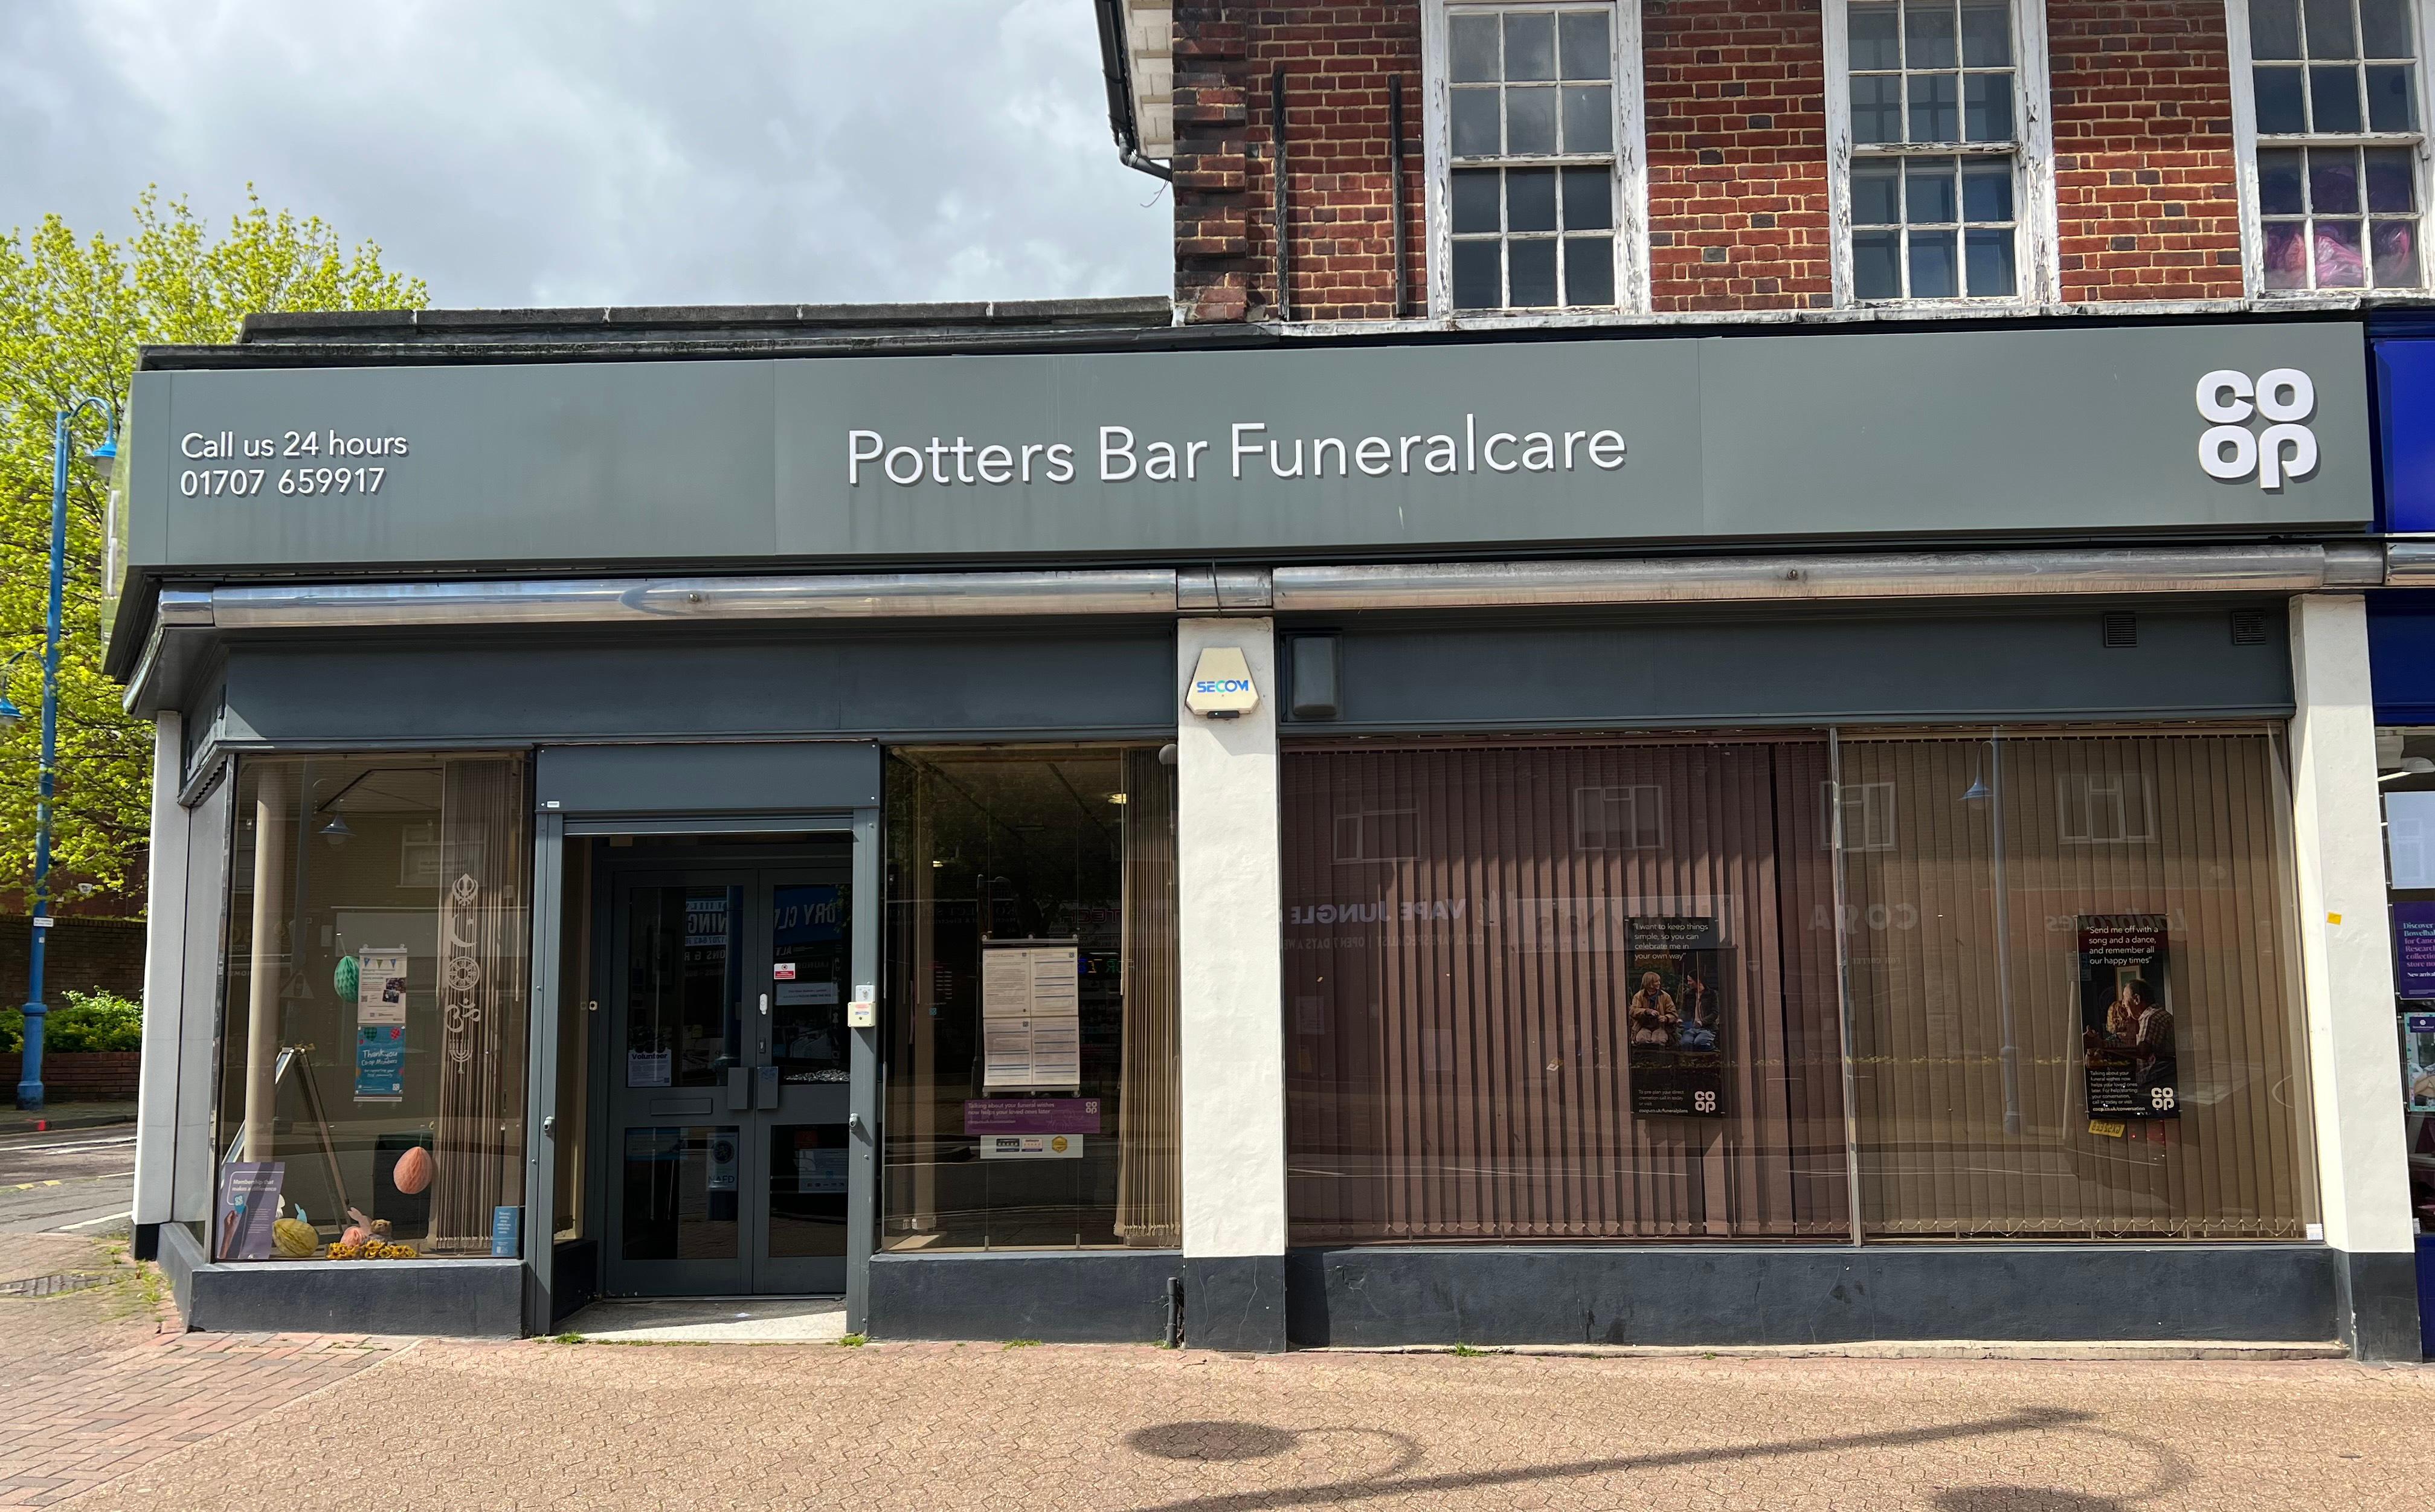 Images Potters Bar Funeralcare